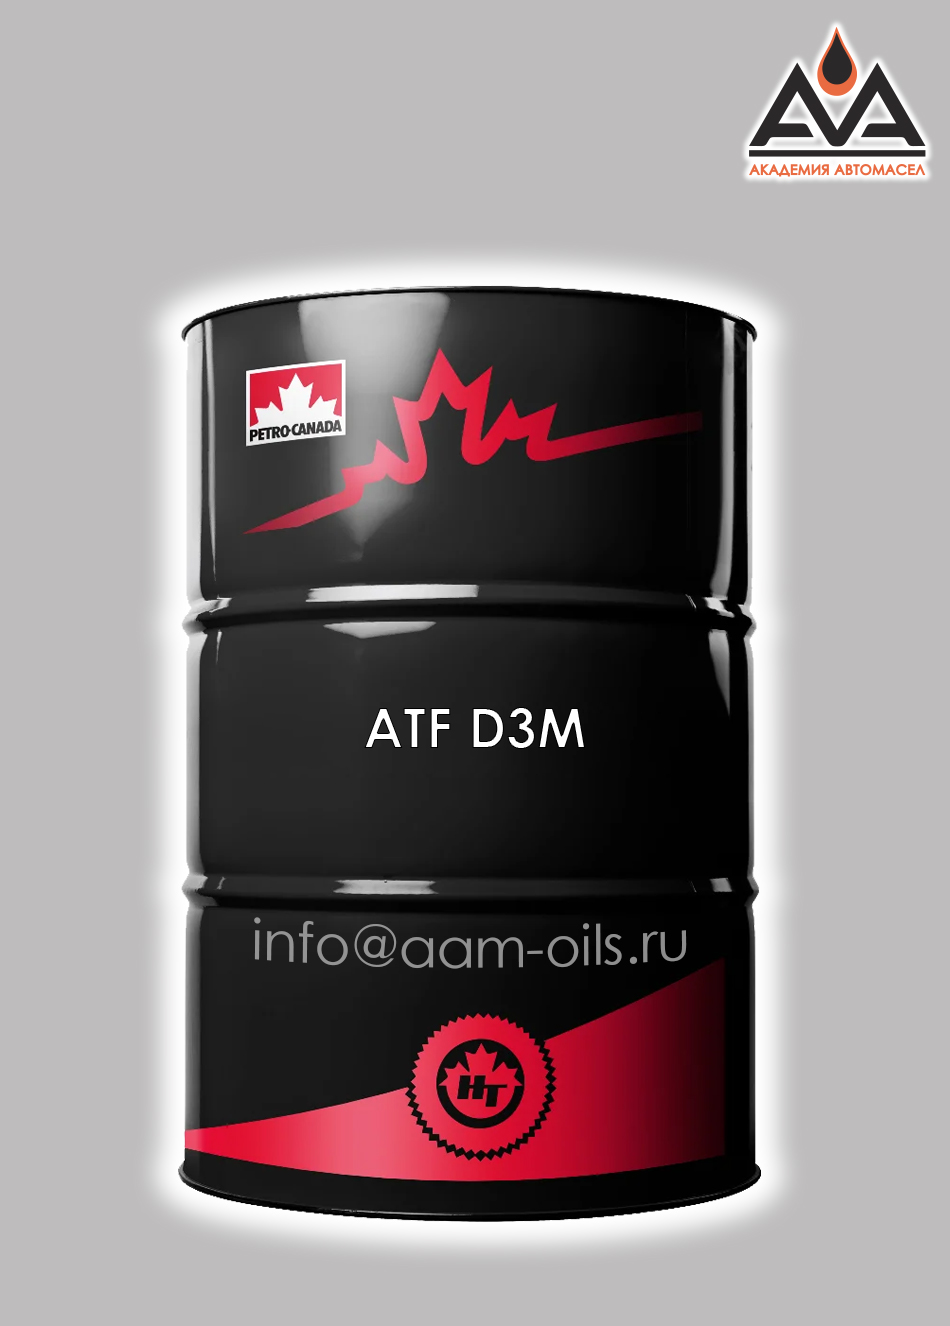 Canada atf. Масло Petro Canada ATF d3m. Petro-Canada 10w30 205л. Масло Петро Канада 10w30 SHP Duron. ATF d3m аналоги.